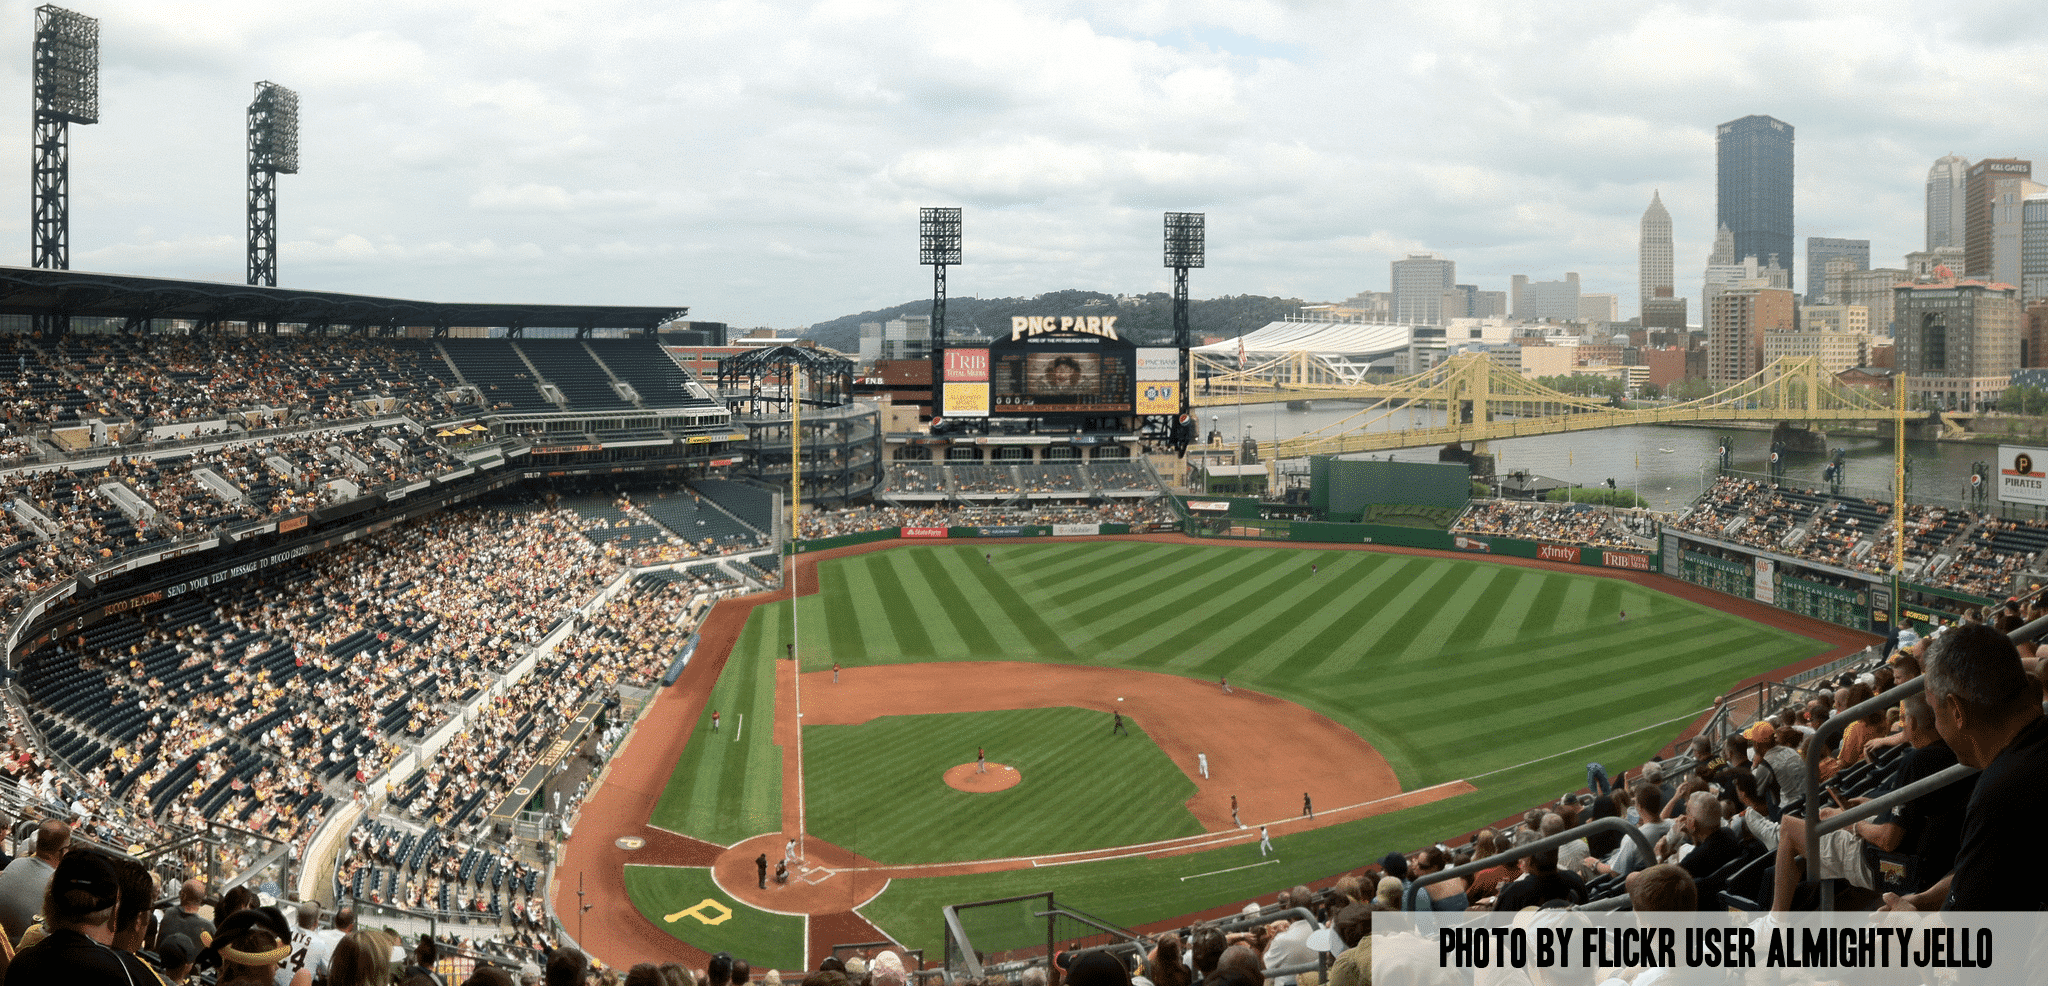 What's New at PNC Park. Today was our annual Media Day at PNC